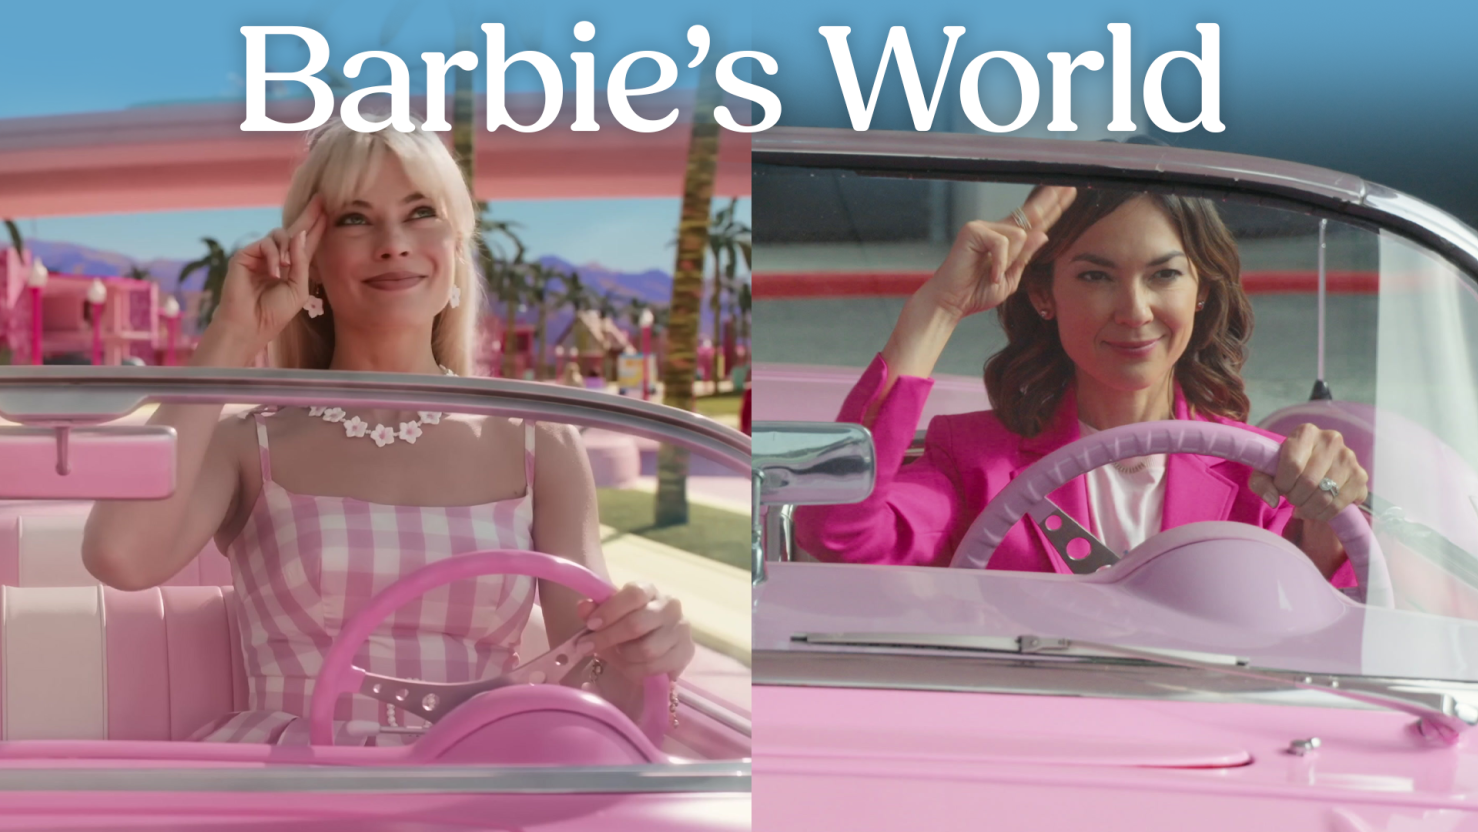 It's Barbies world, I'm just living in it! 💞Barbie x Coppel #barbiefashion